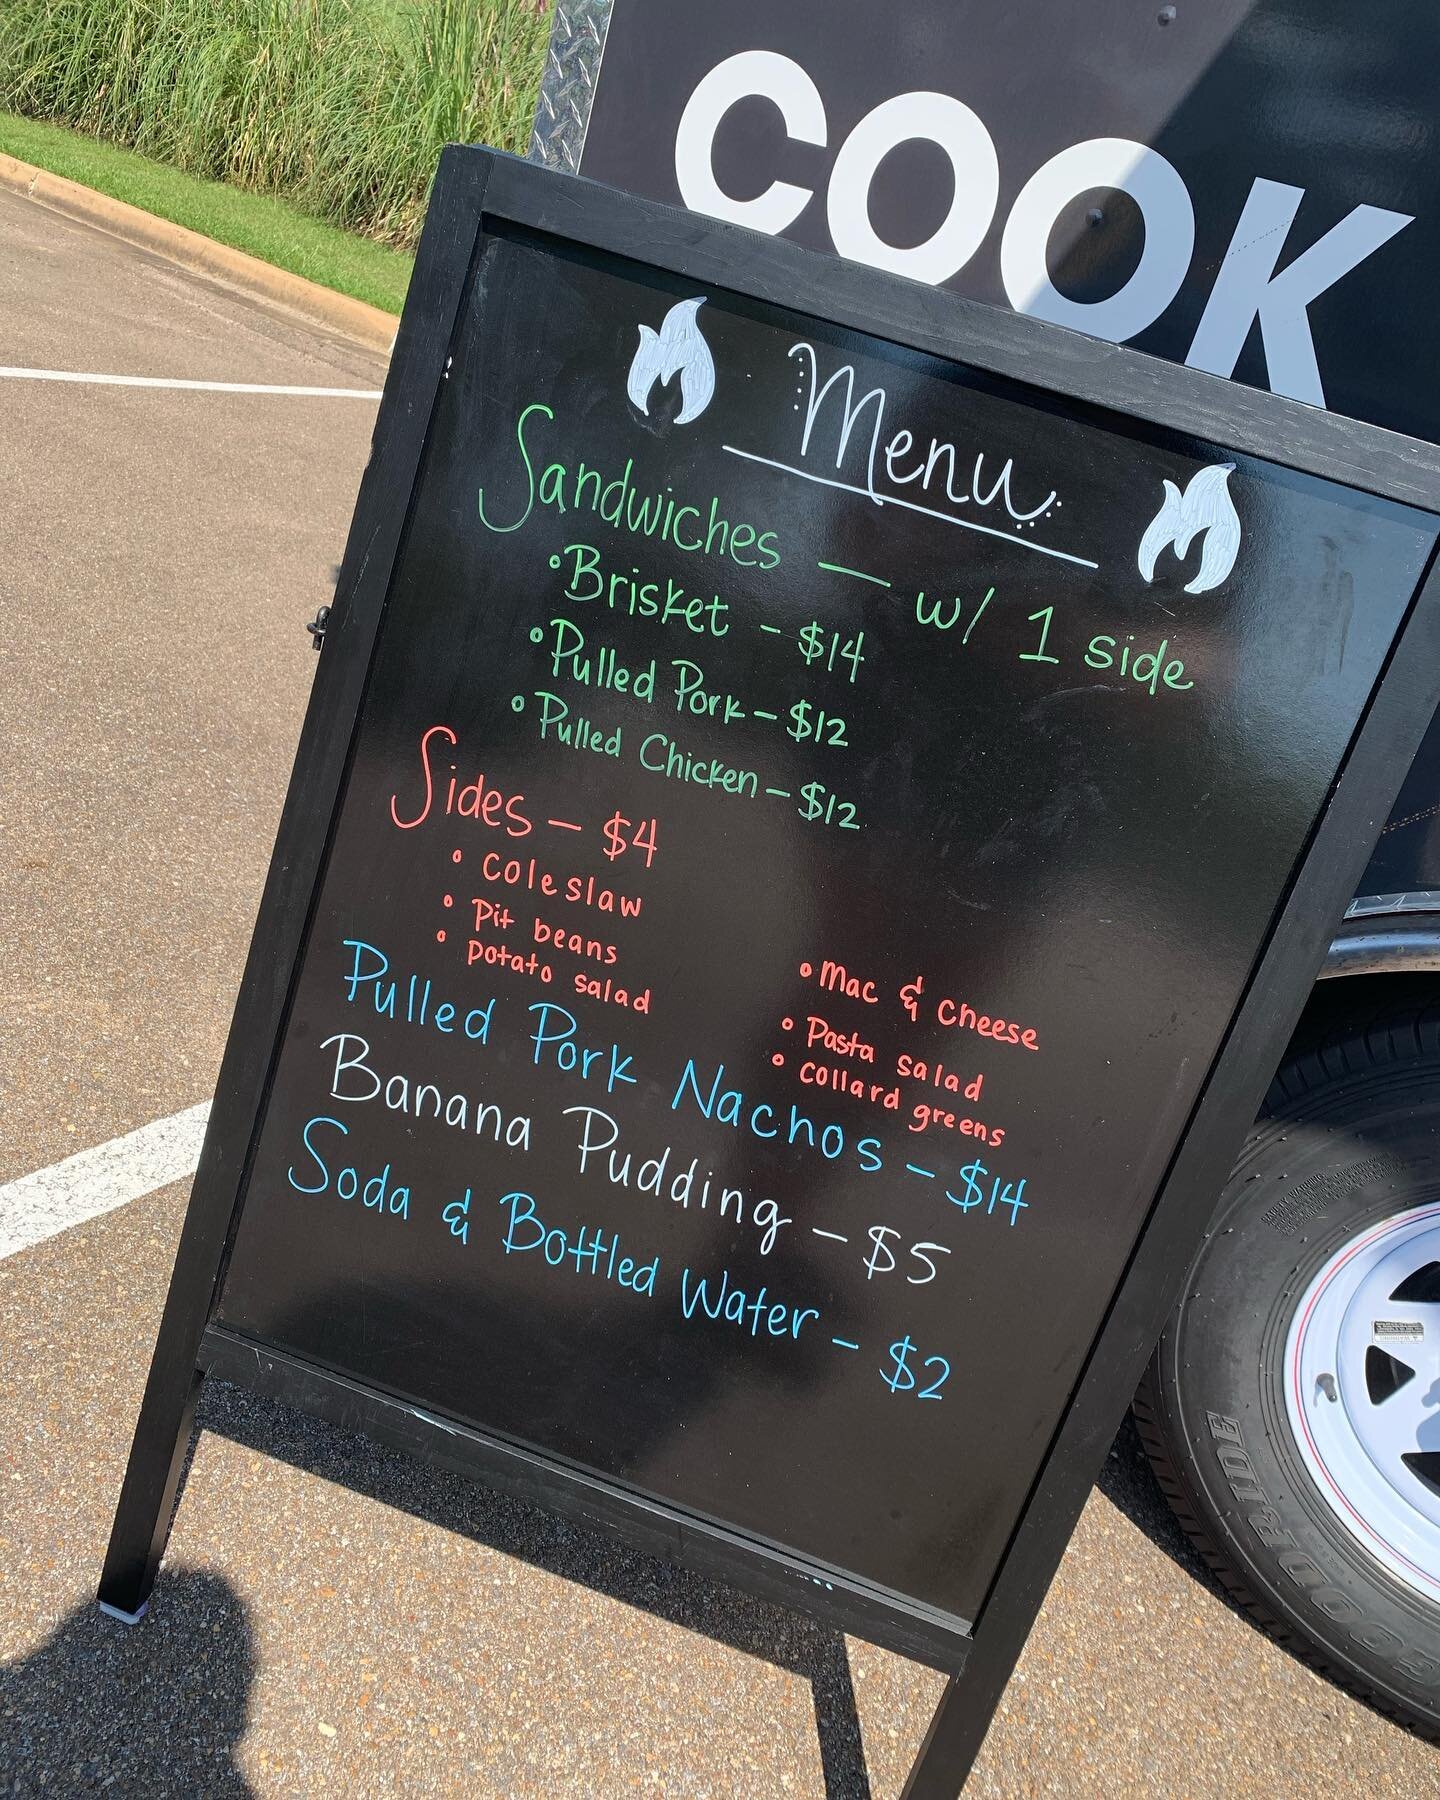 Come check out our first food truck event at Word of Life on Lakeland! We&rsquo;ll be here until 2:00 pm or sold out. #kenovasmokehouse #kenovabbq #kenovasmokehousefoodtruck